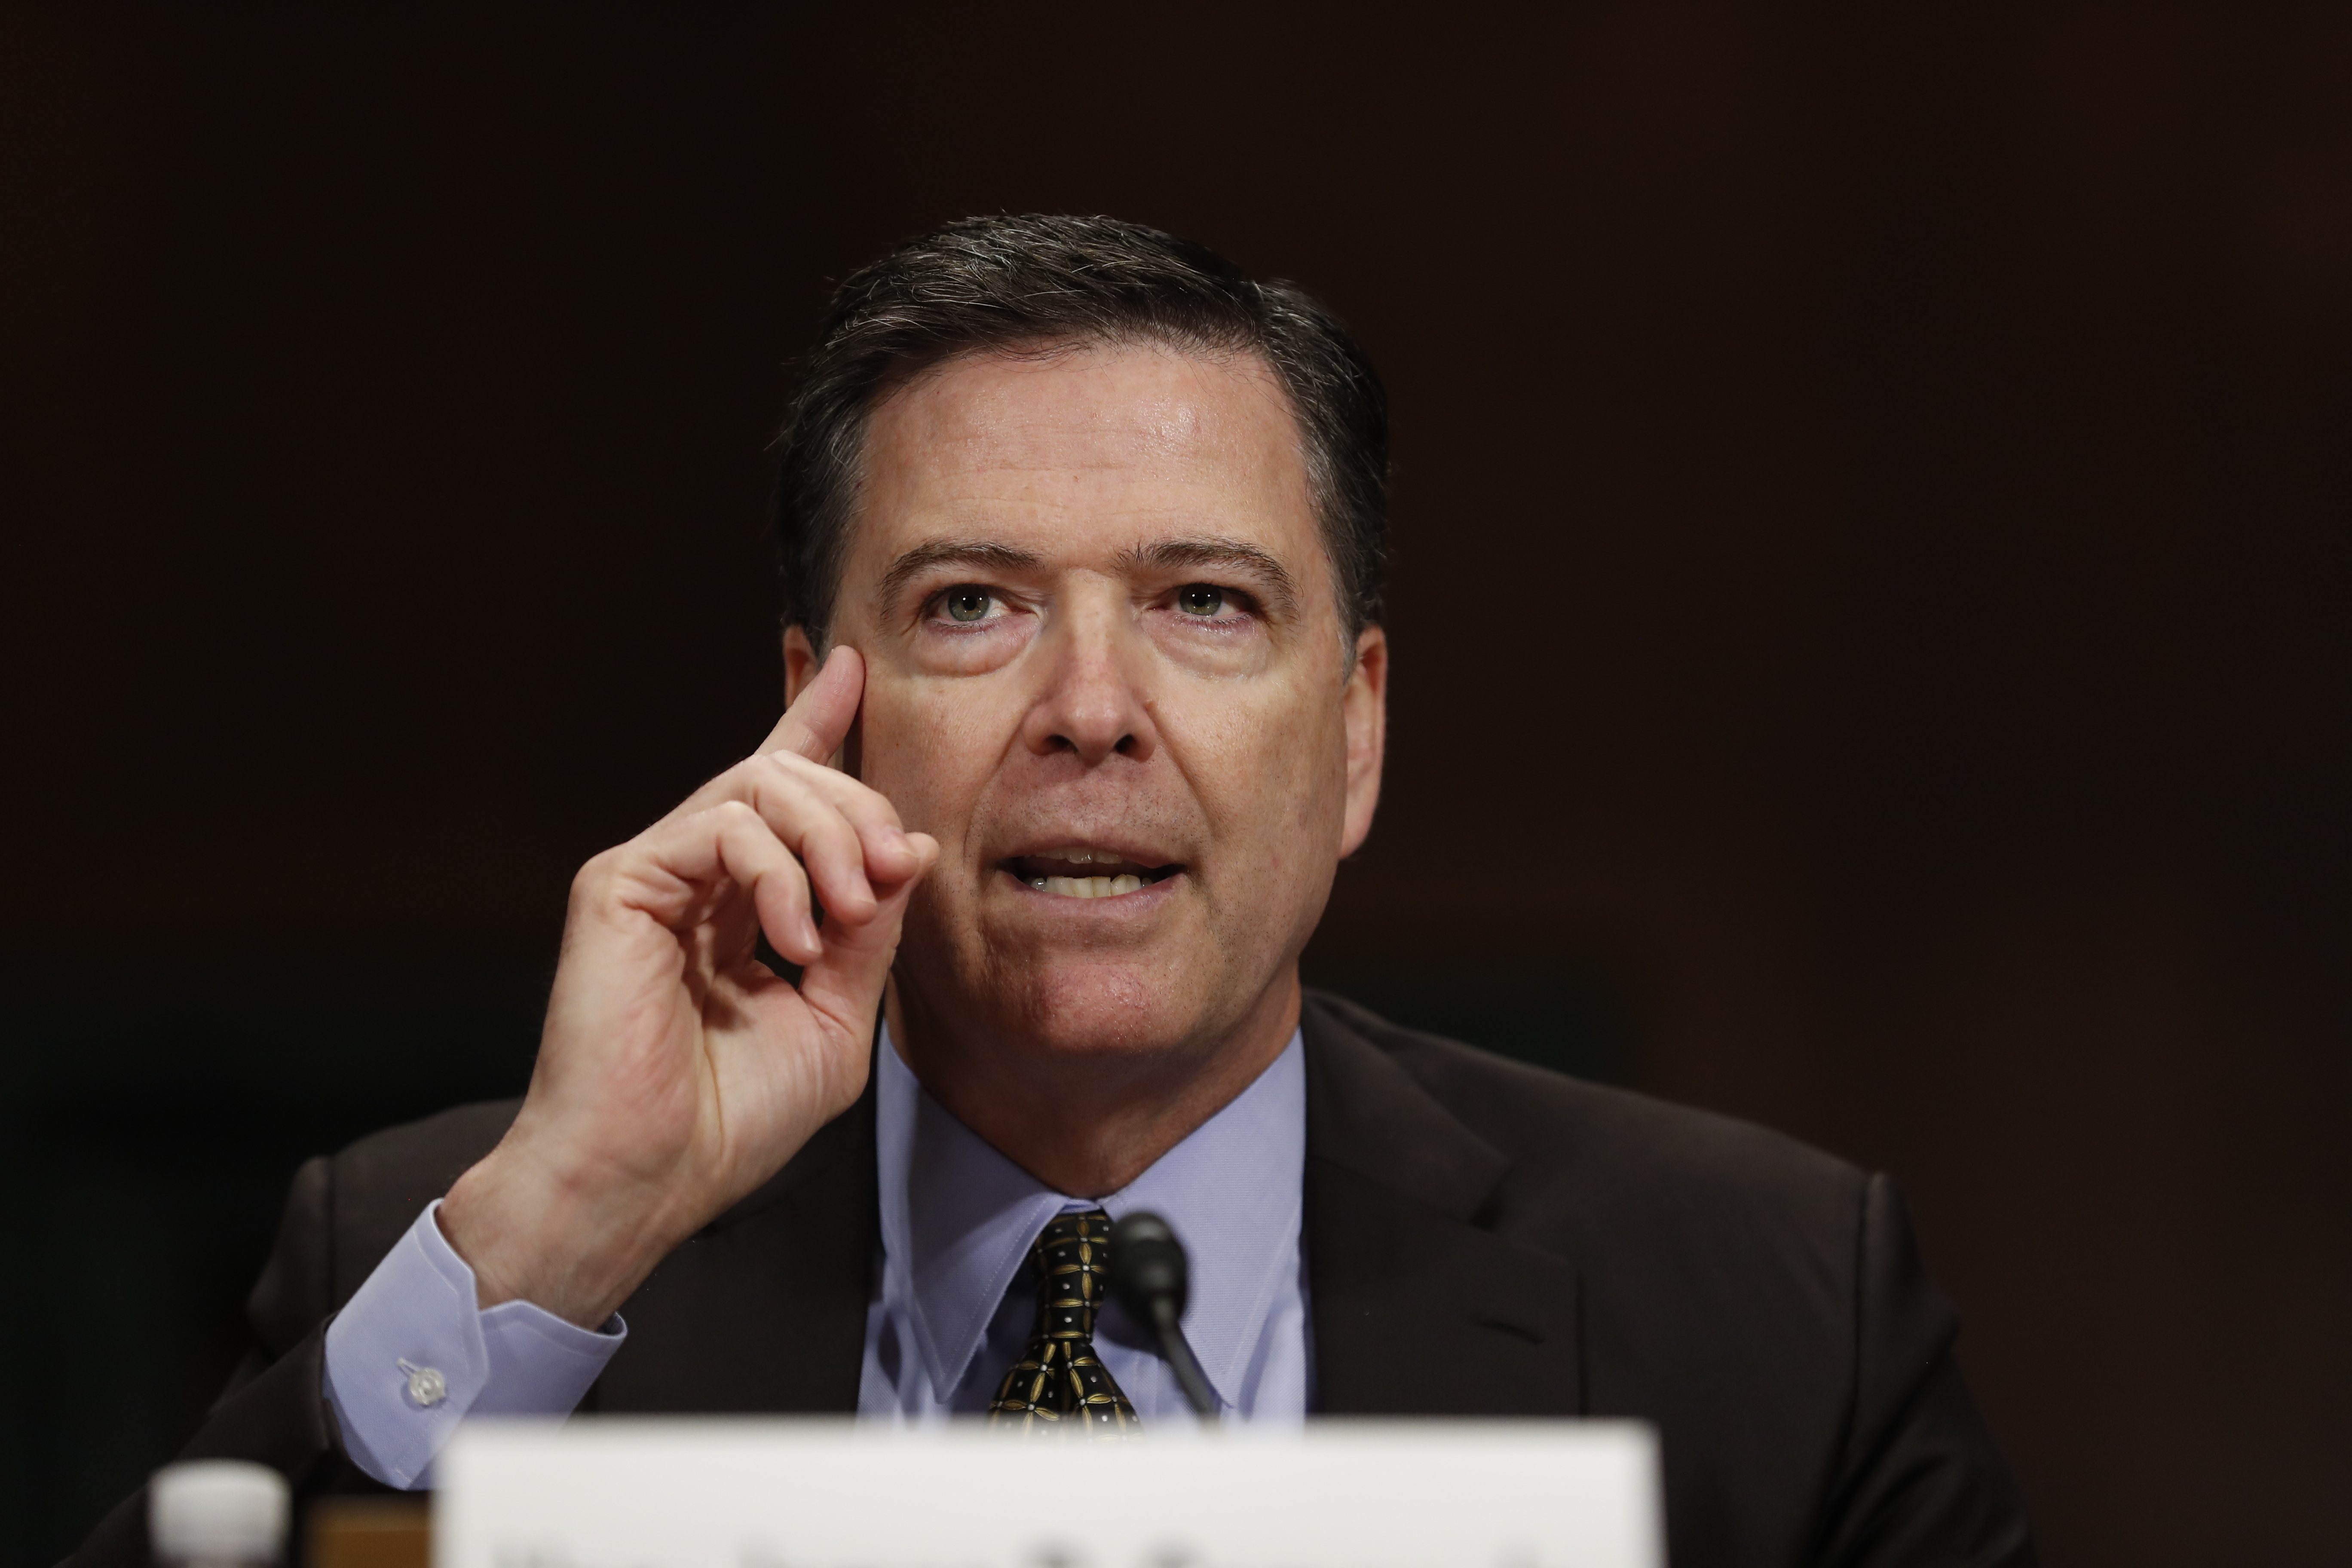 DOCS: James Comey’s prepared remarks for Senate Intelligence Committee